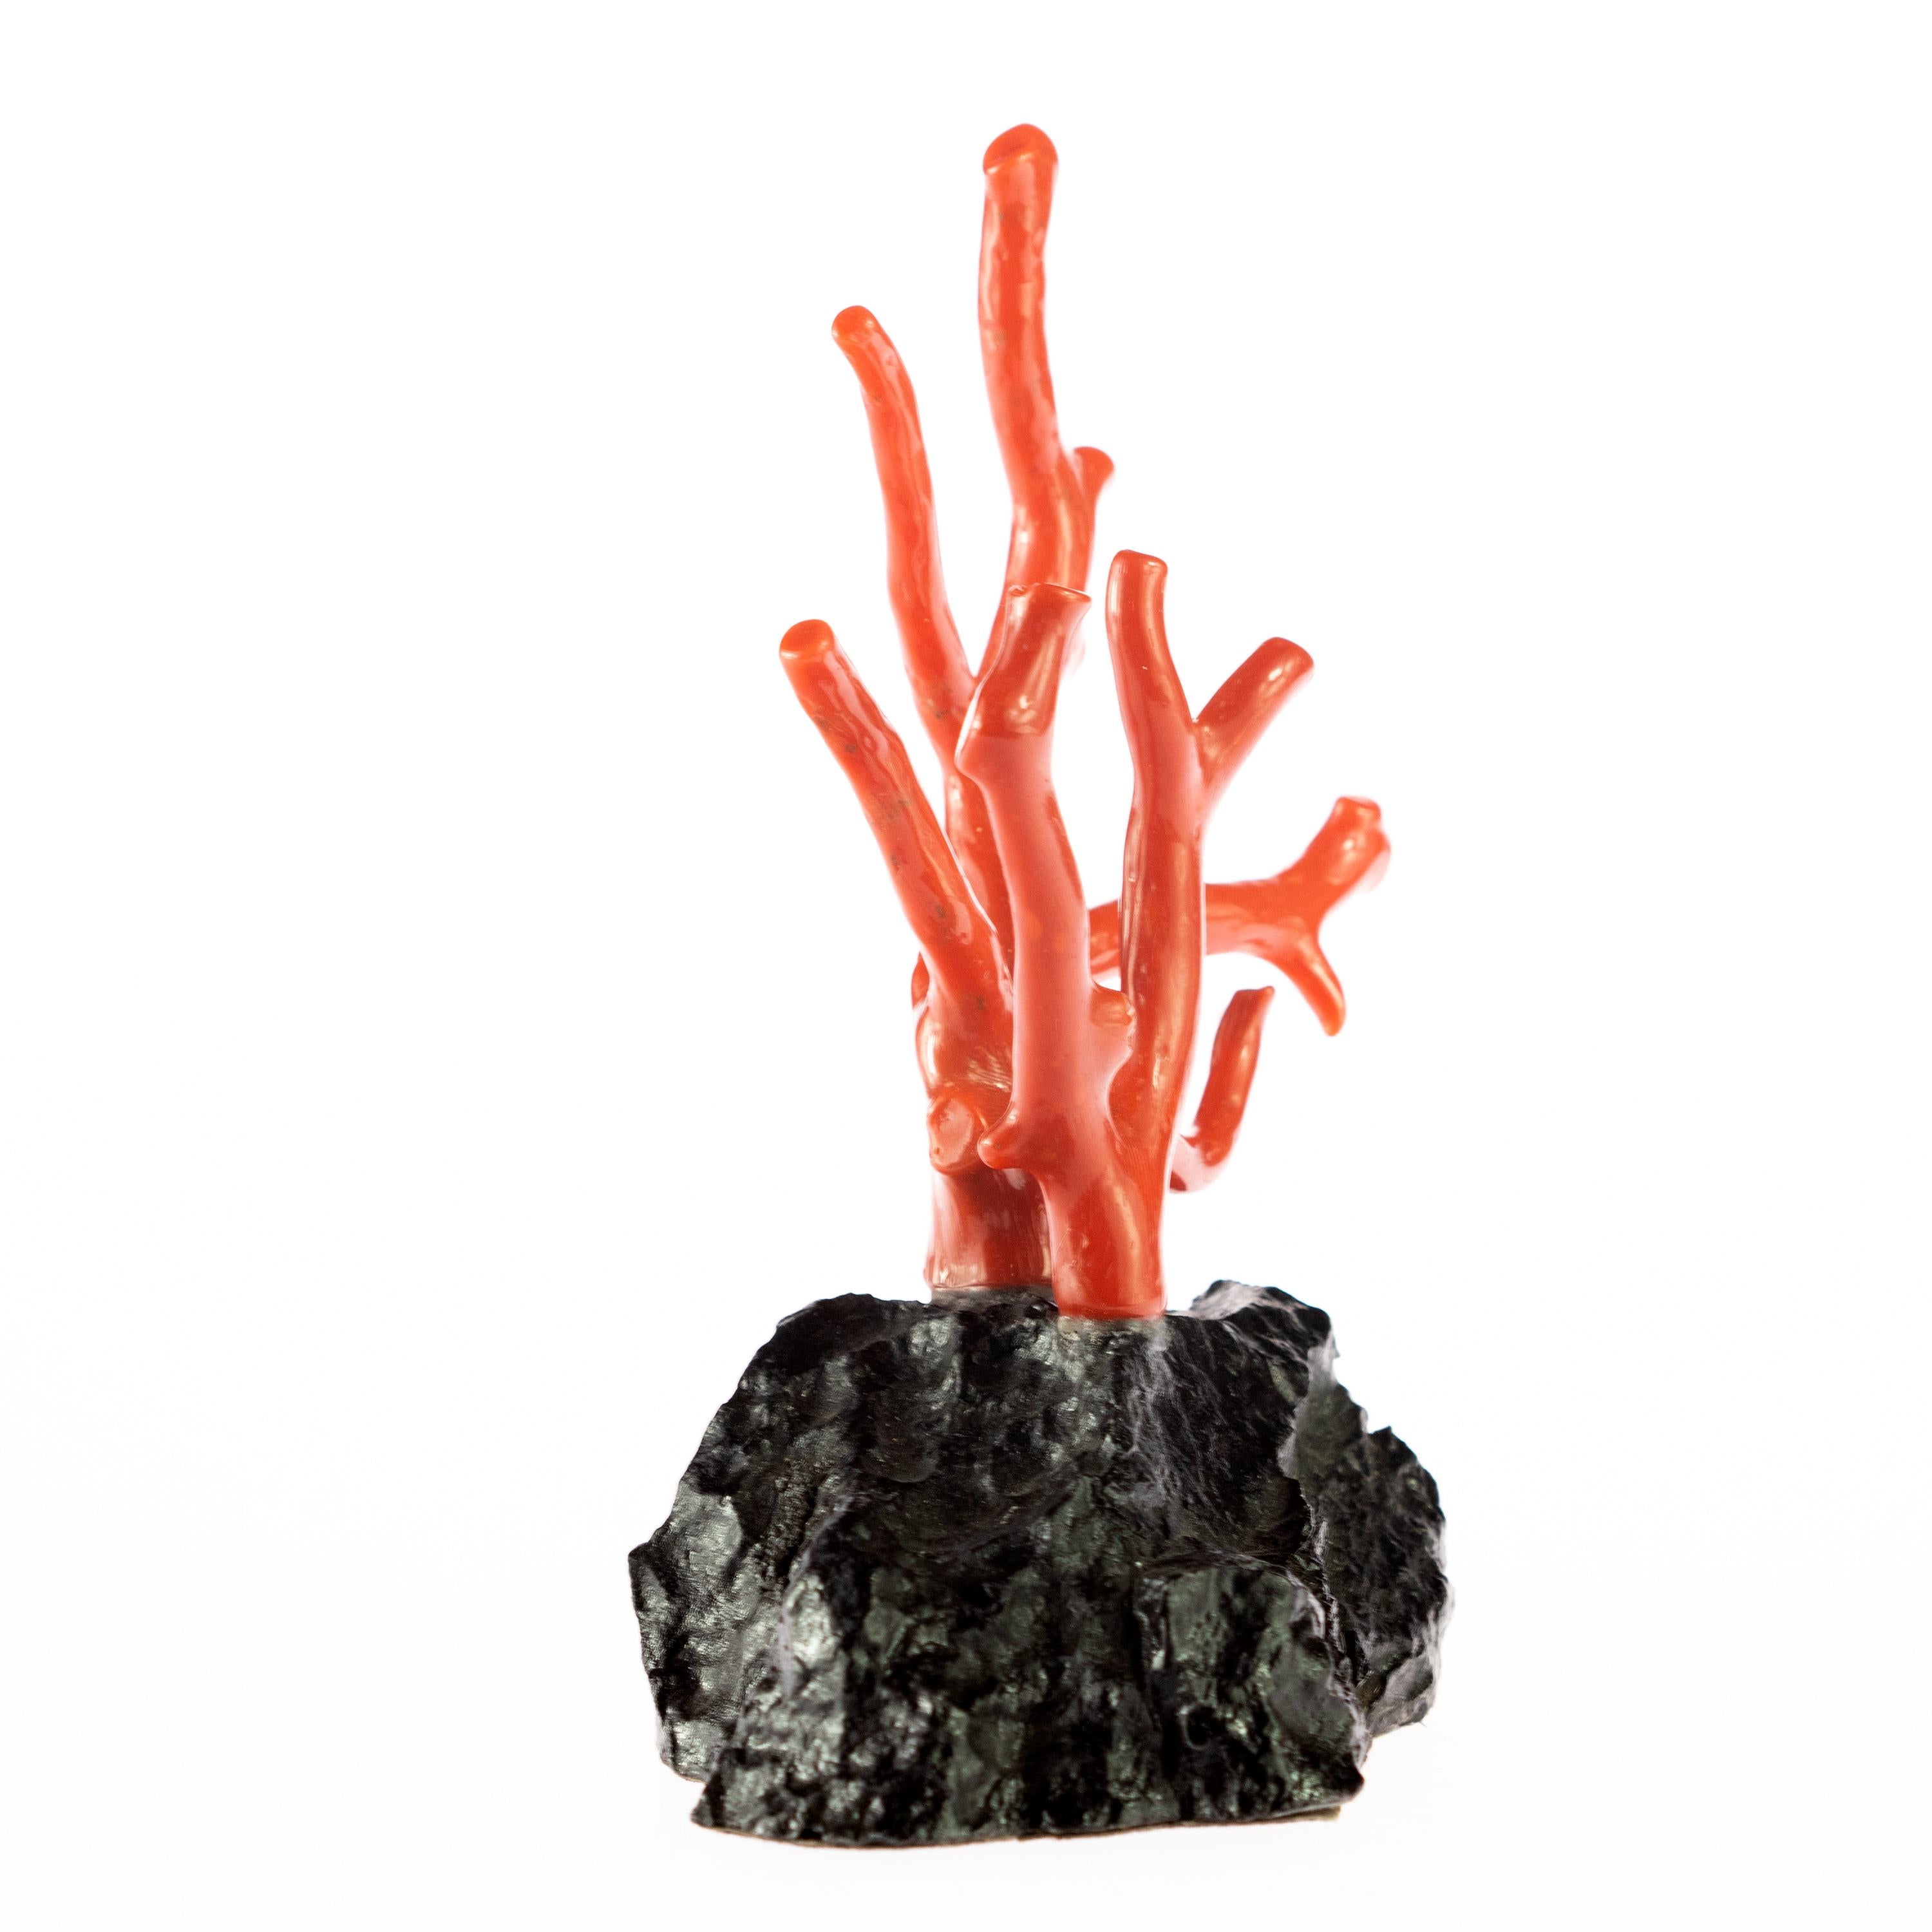 Exotic natural coral sculpture. Inspired in the reality and beauty of the ocean. Red mediterranean coral comes to live in a unique and natural form. The item has a black support made of obsidian.

Inspired by ancient mythology which holds that the